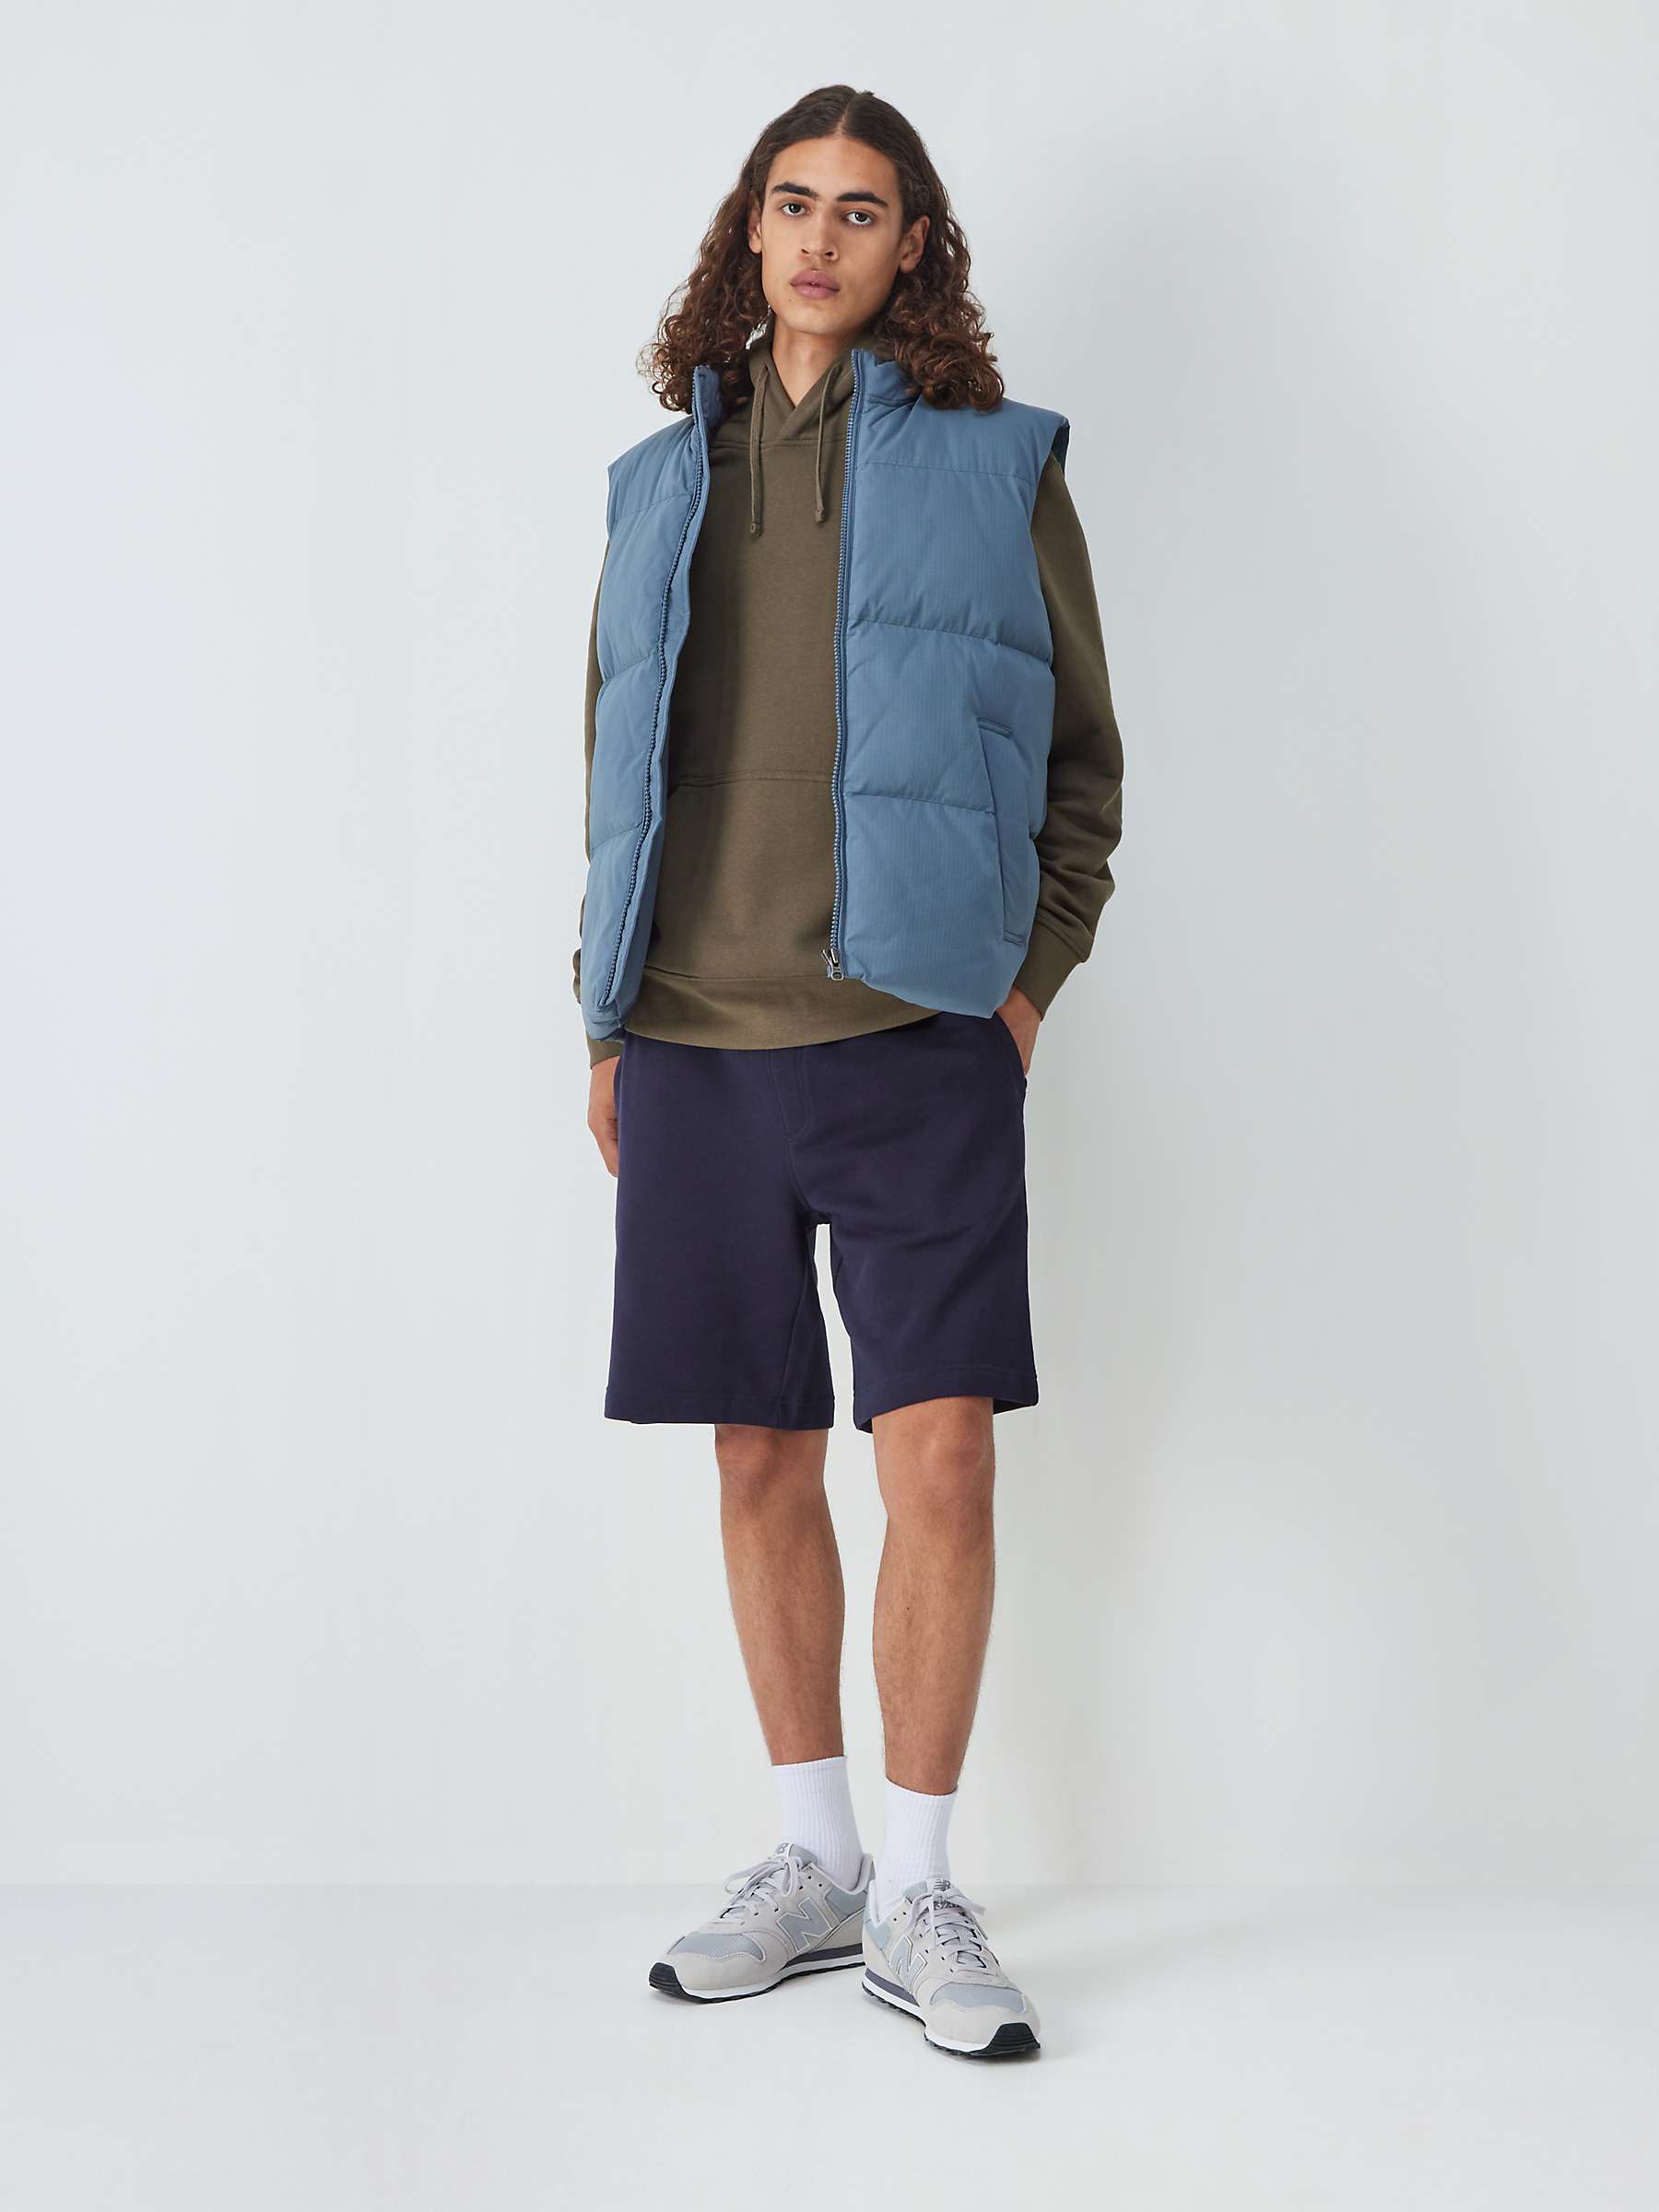 Buy John Lewis ANYDAY Casual Sweat Shorts Online at johnlewis.com